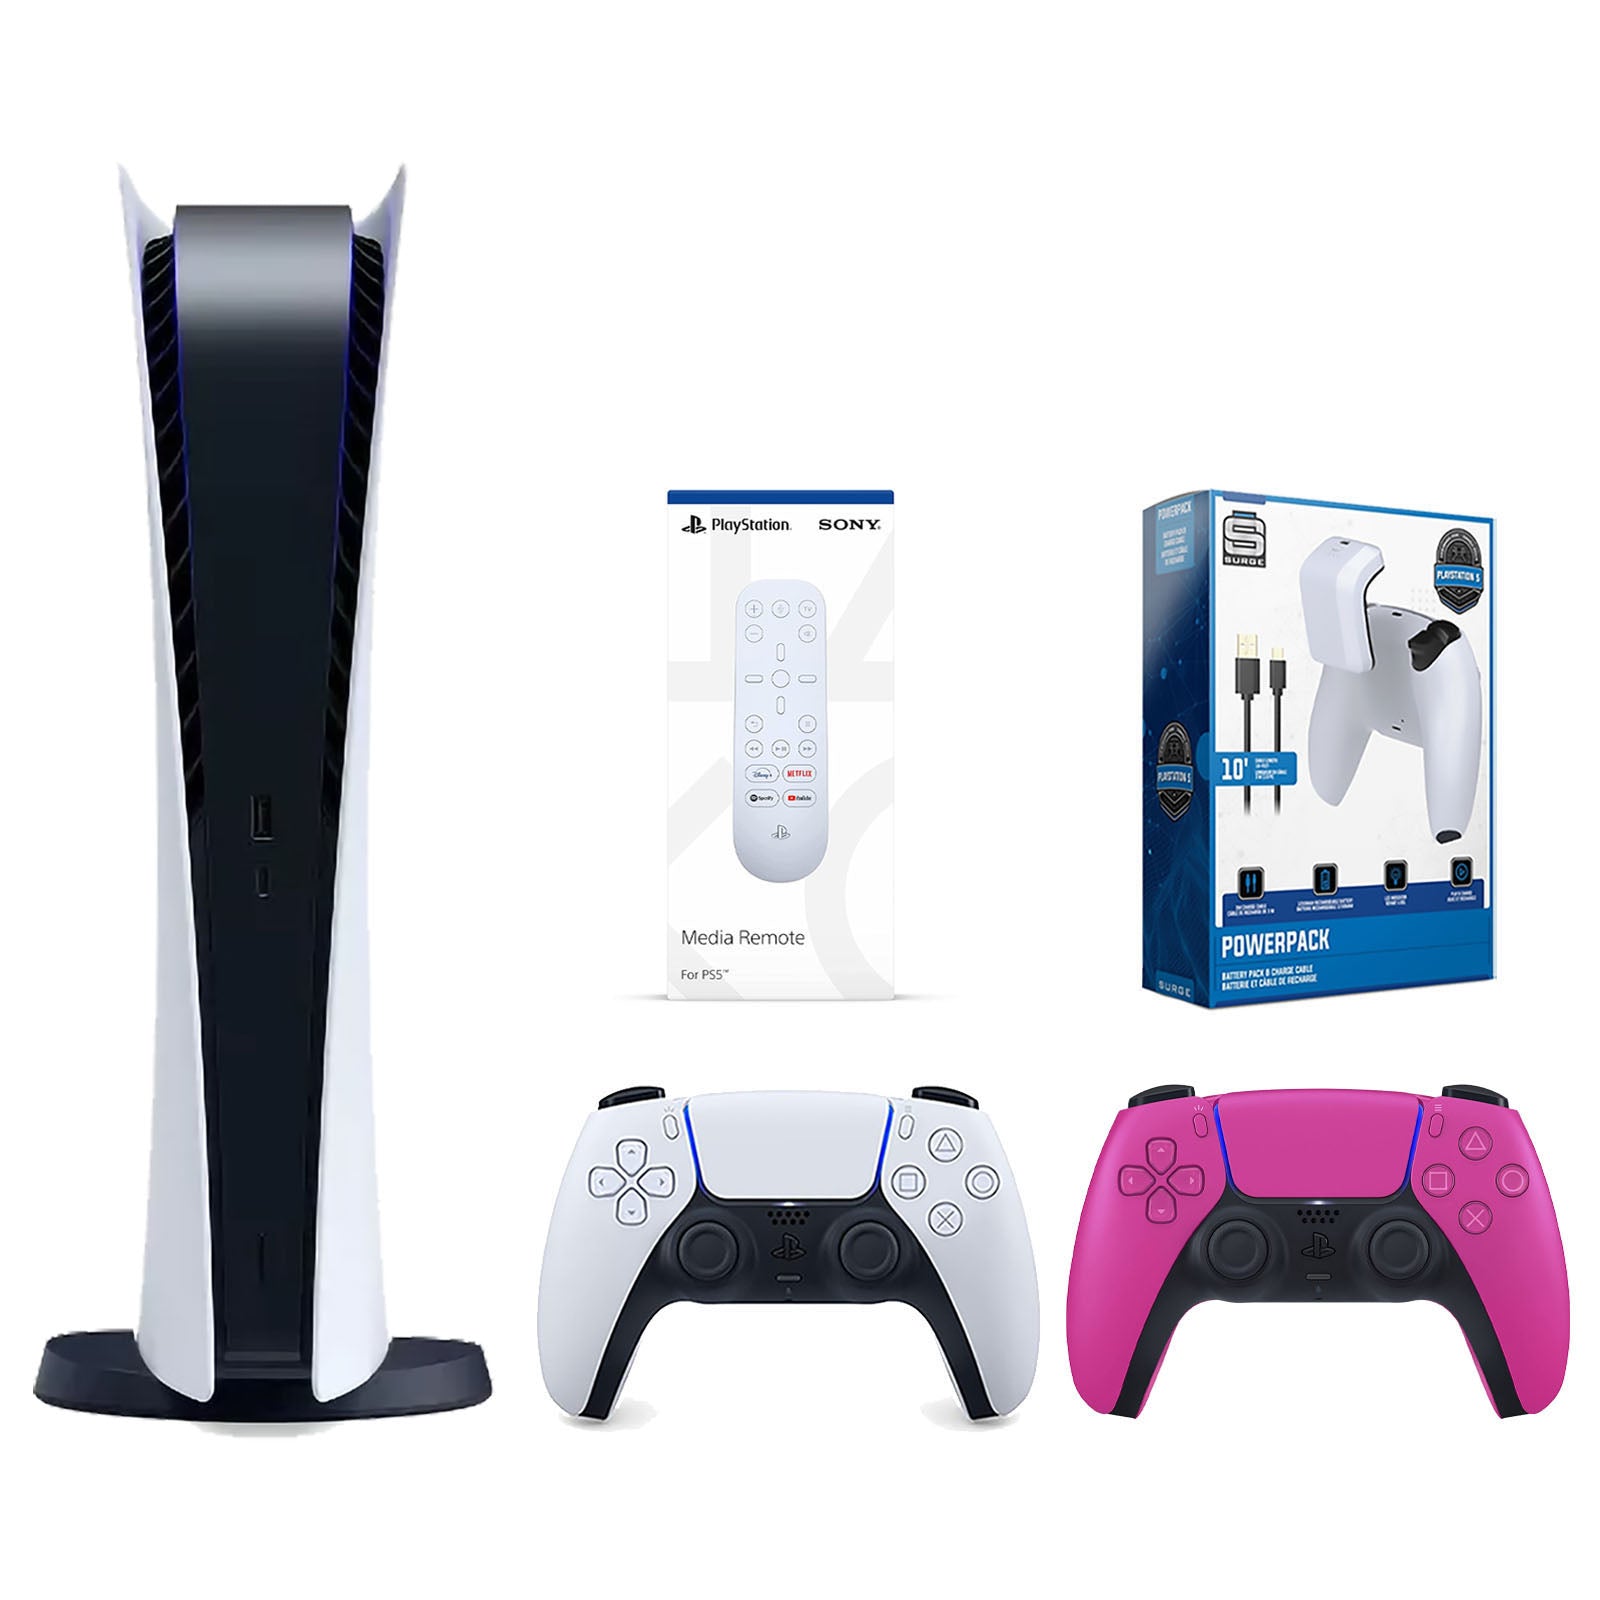 Sony Playstation 5 Digital Edition Console with Extra Pink Controller, Media Remote and Surge PowerPack Battery Pack & Charge Cable Bundle - Pro-Distributing